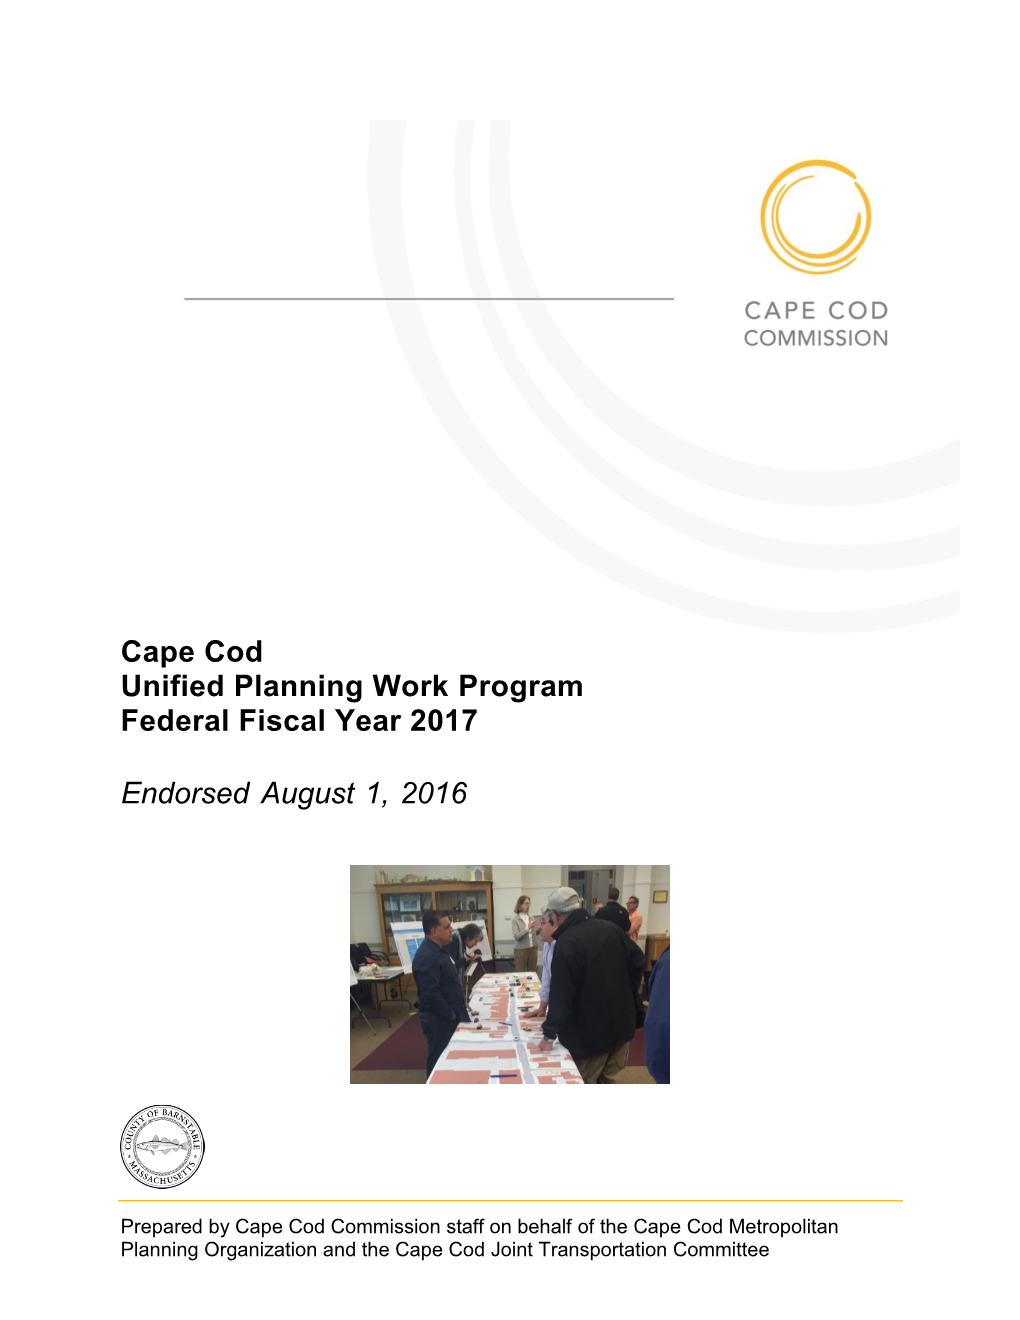 Cape Cod Unified Planning Work Program Federal Fiscal Year 2017